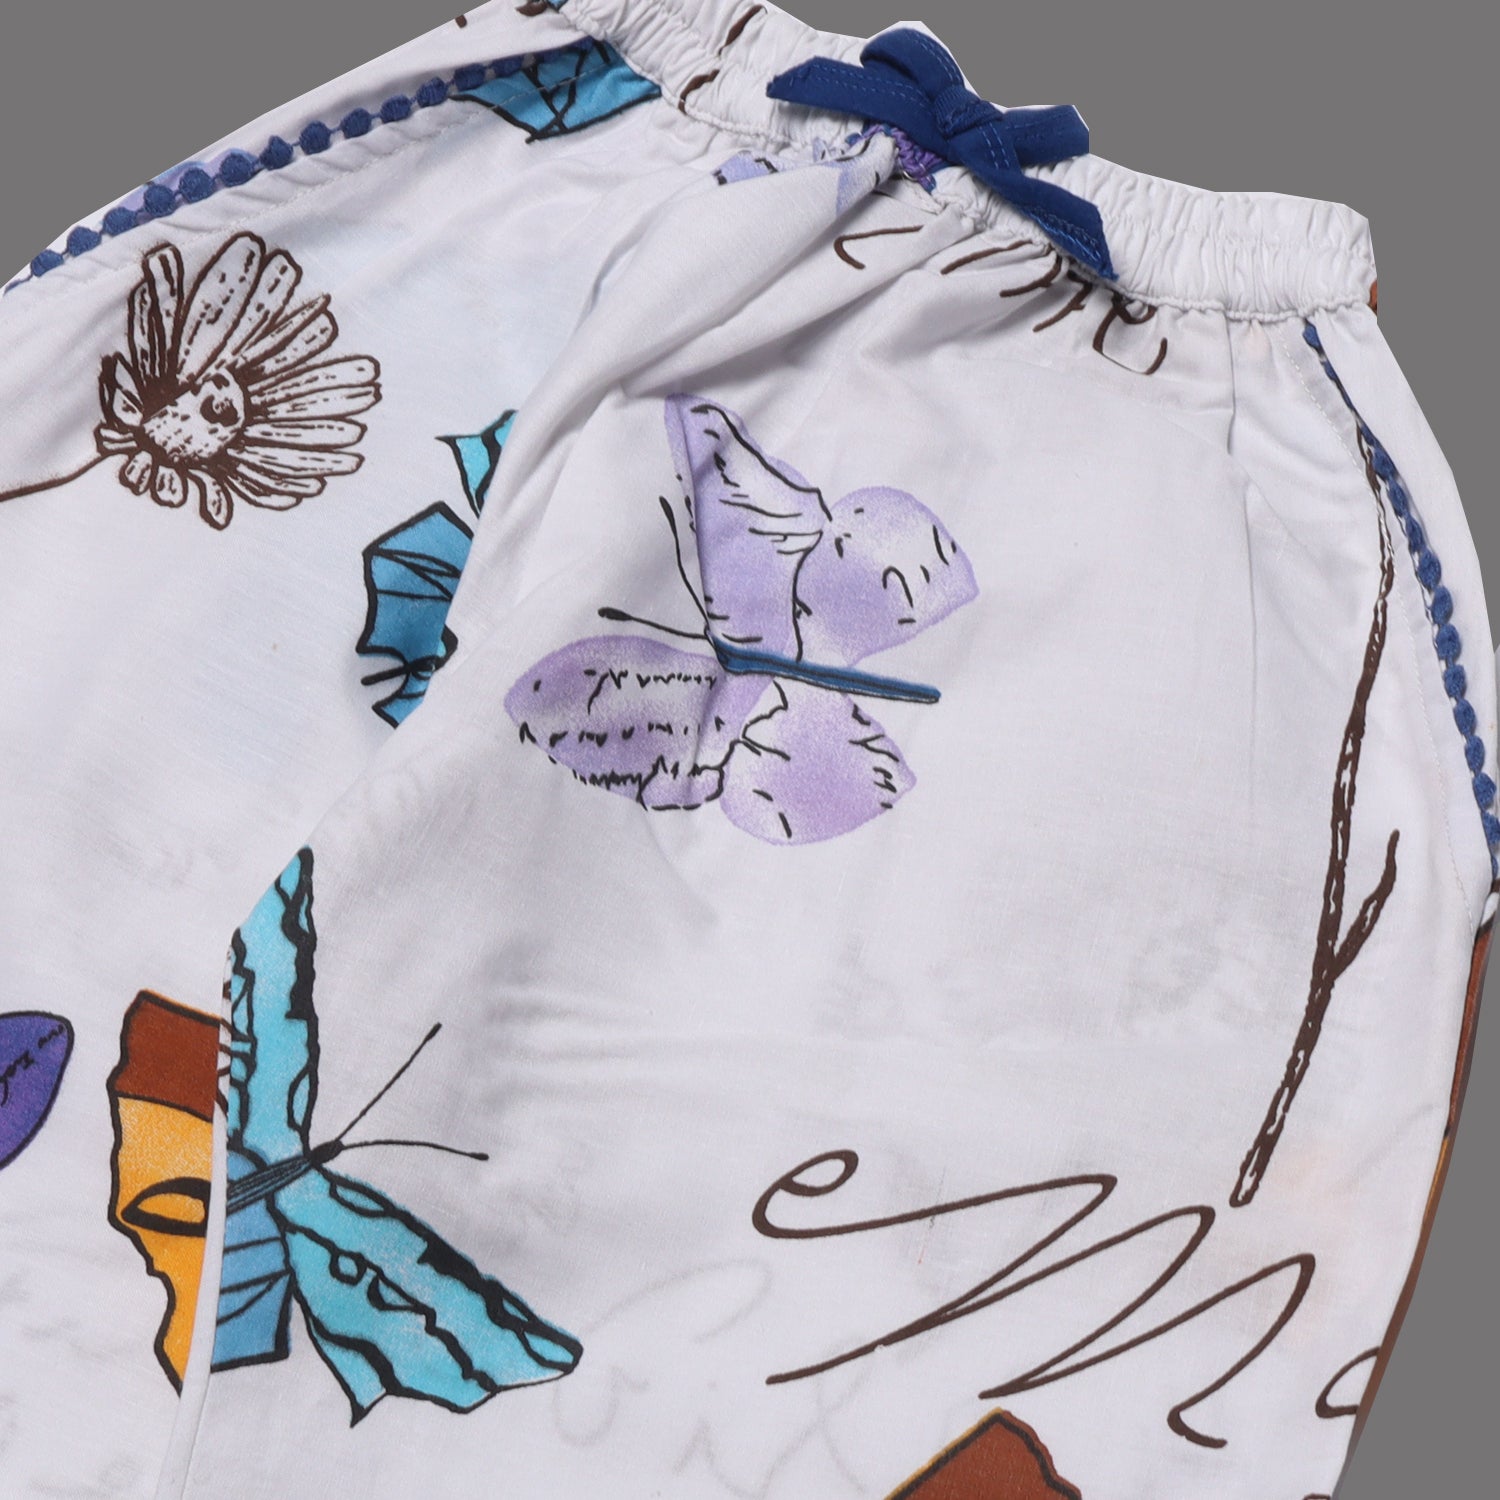 WHITE WITH BIG BUTTERFLIES PRINTED FRIL POCKETS PAJAMA FOR GIRLS